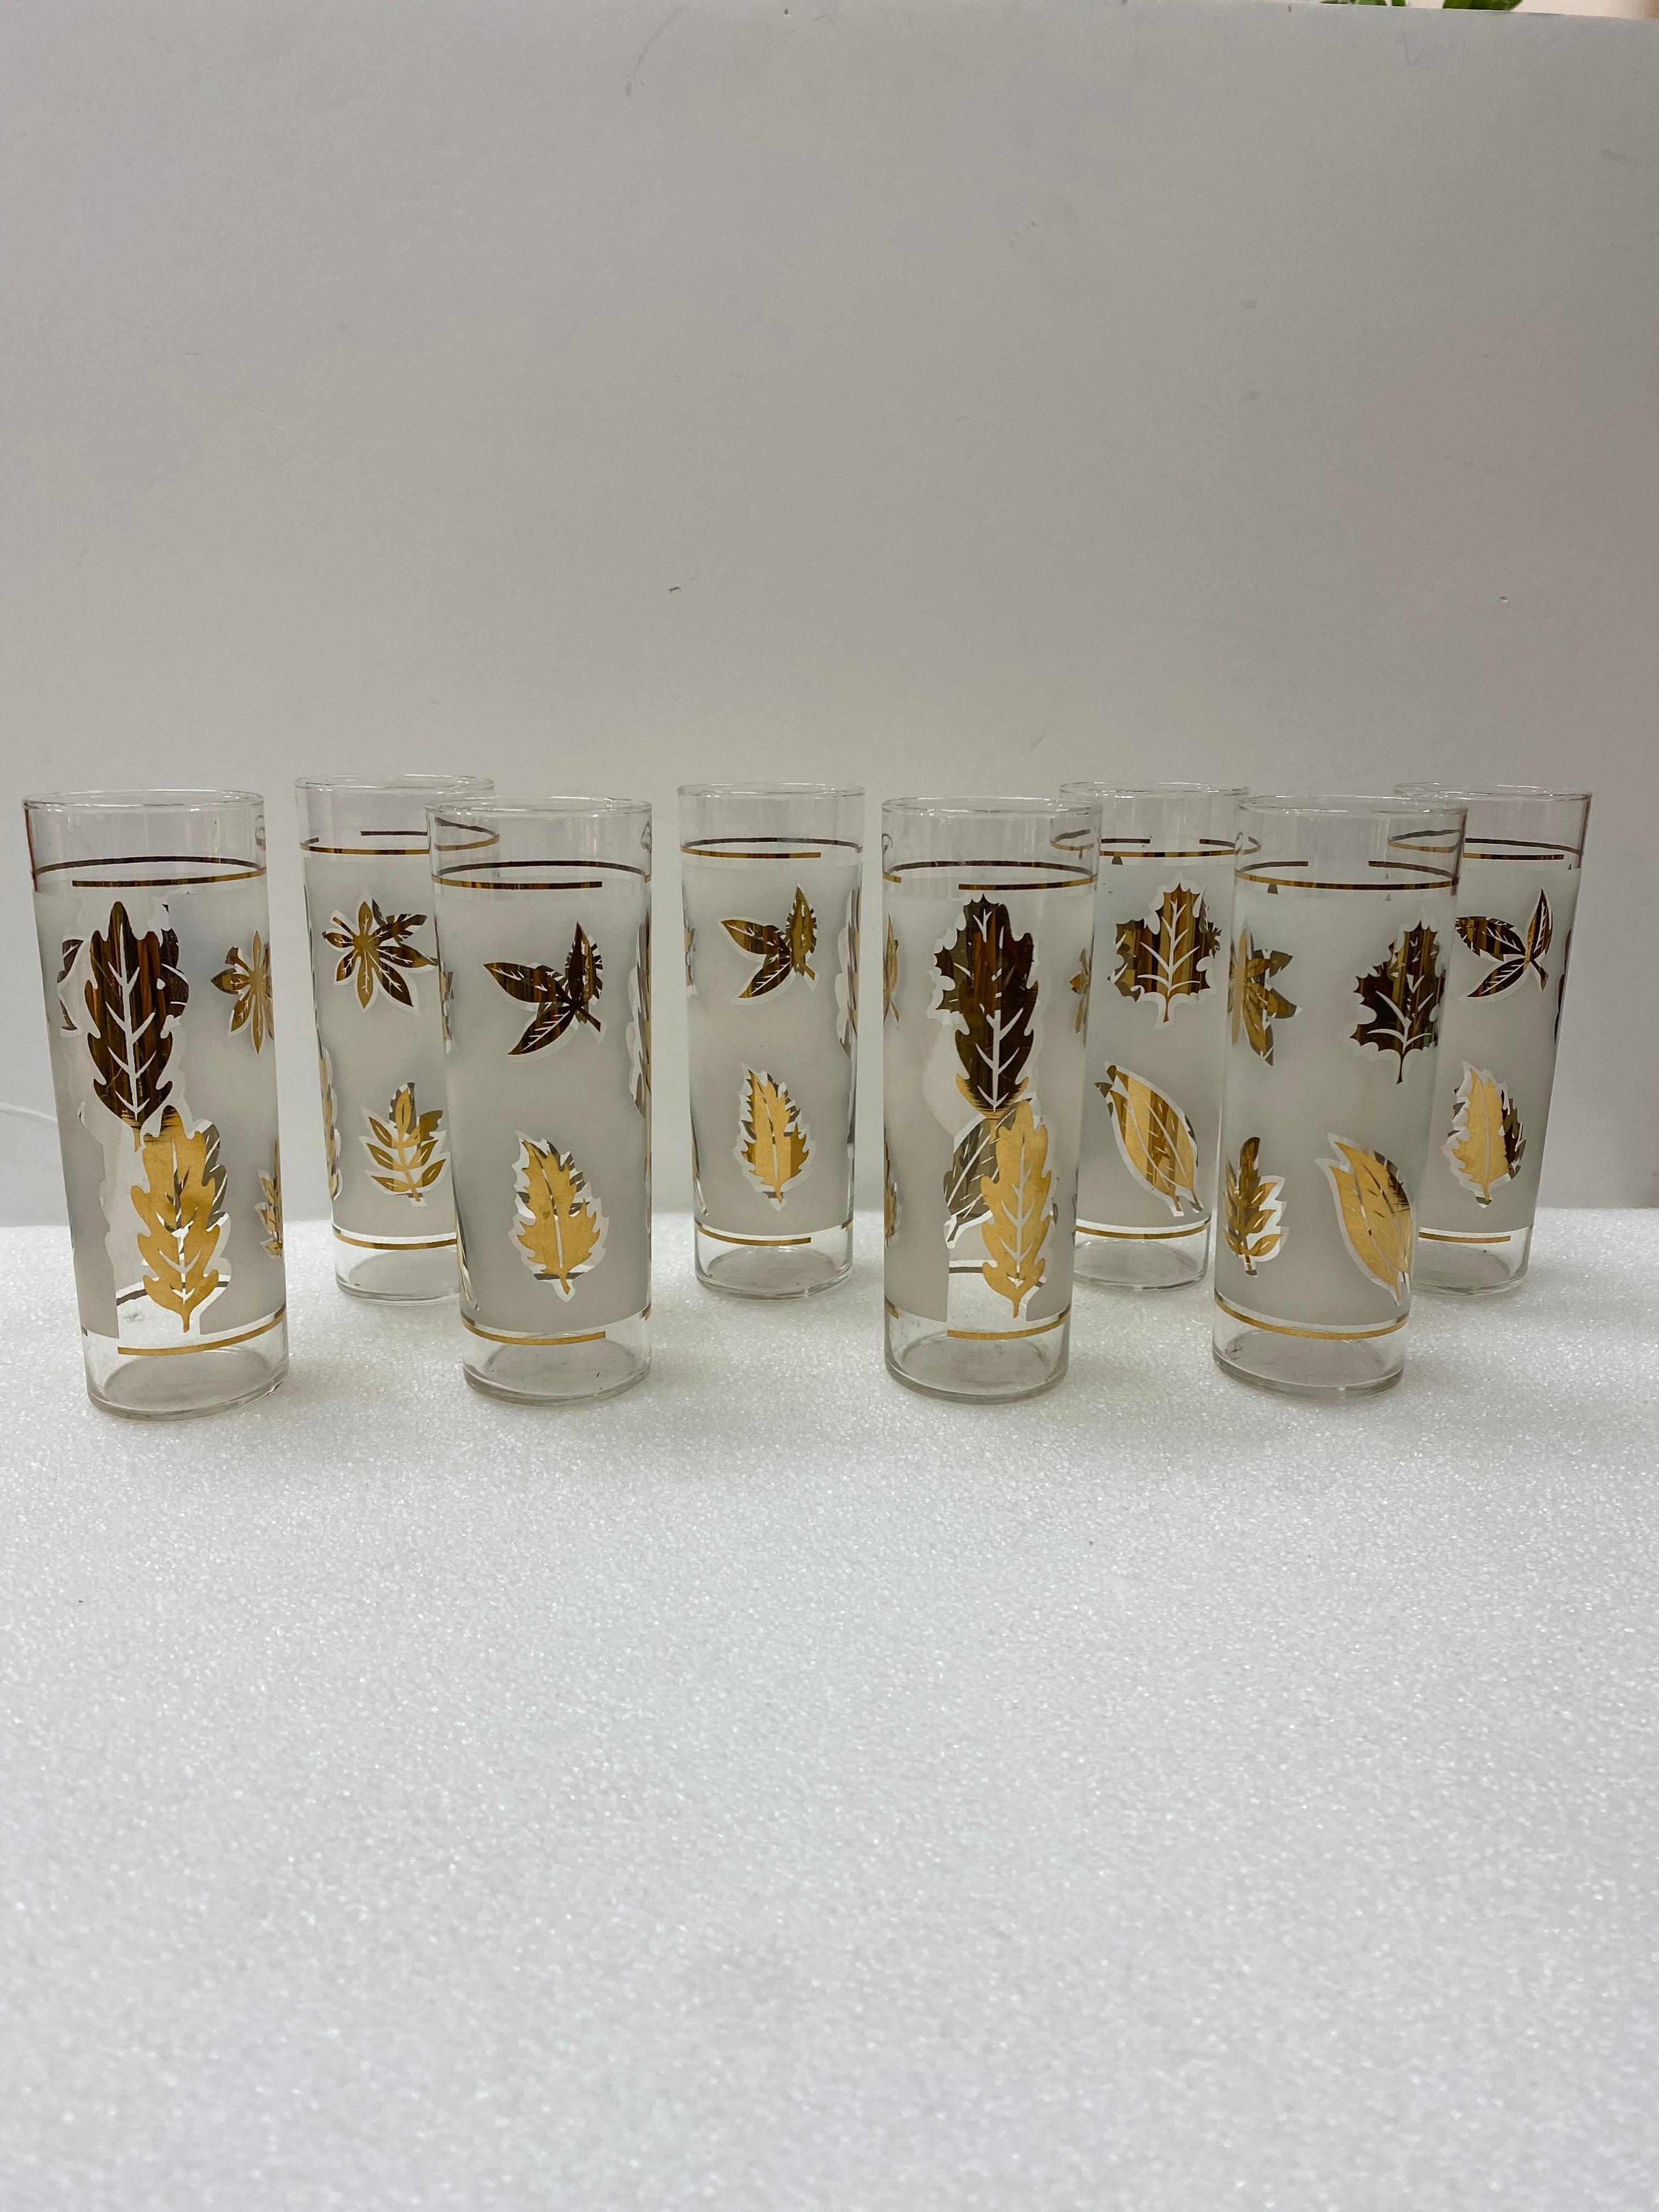 Mid-Century Modern/Hollywood Regency set of eight frosted Libbey highball glasses. This is a wonderful 8 piece barware set created and marketed for the Libbey Glass Company in 1957. The glasses are adorned with 22k gold embellished leaves on a